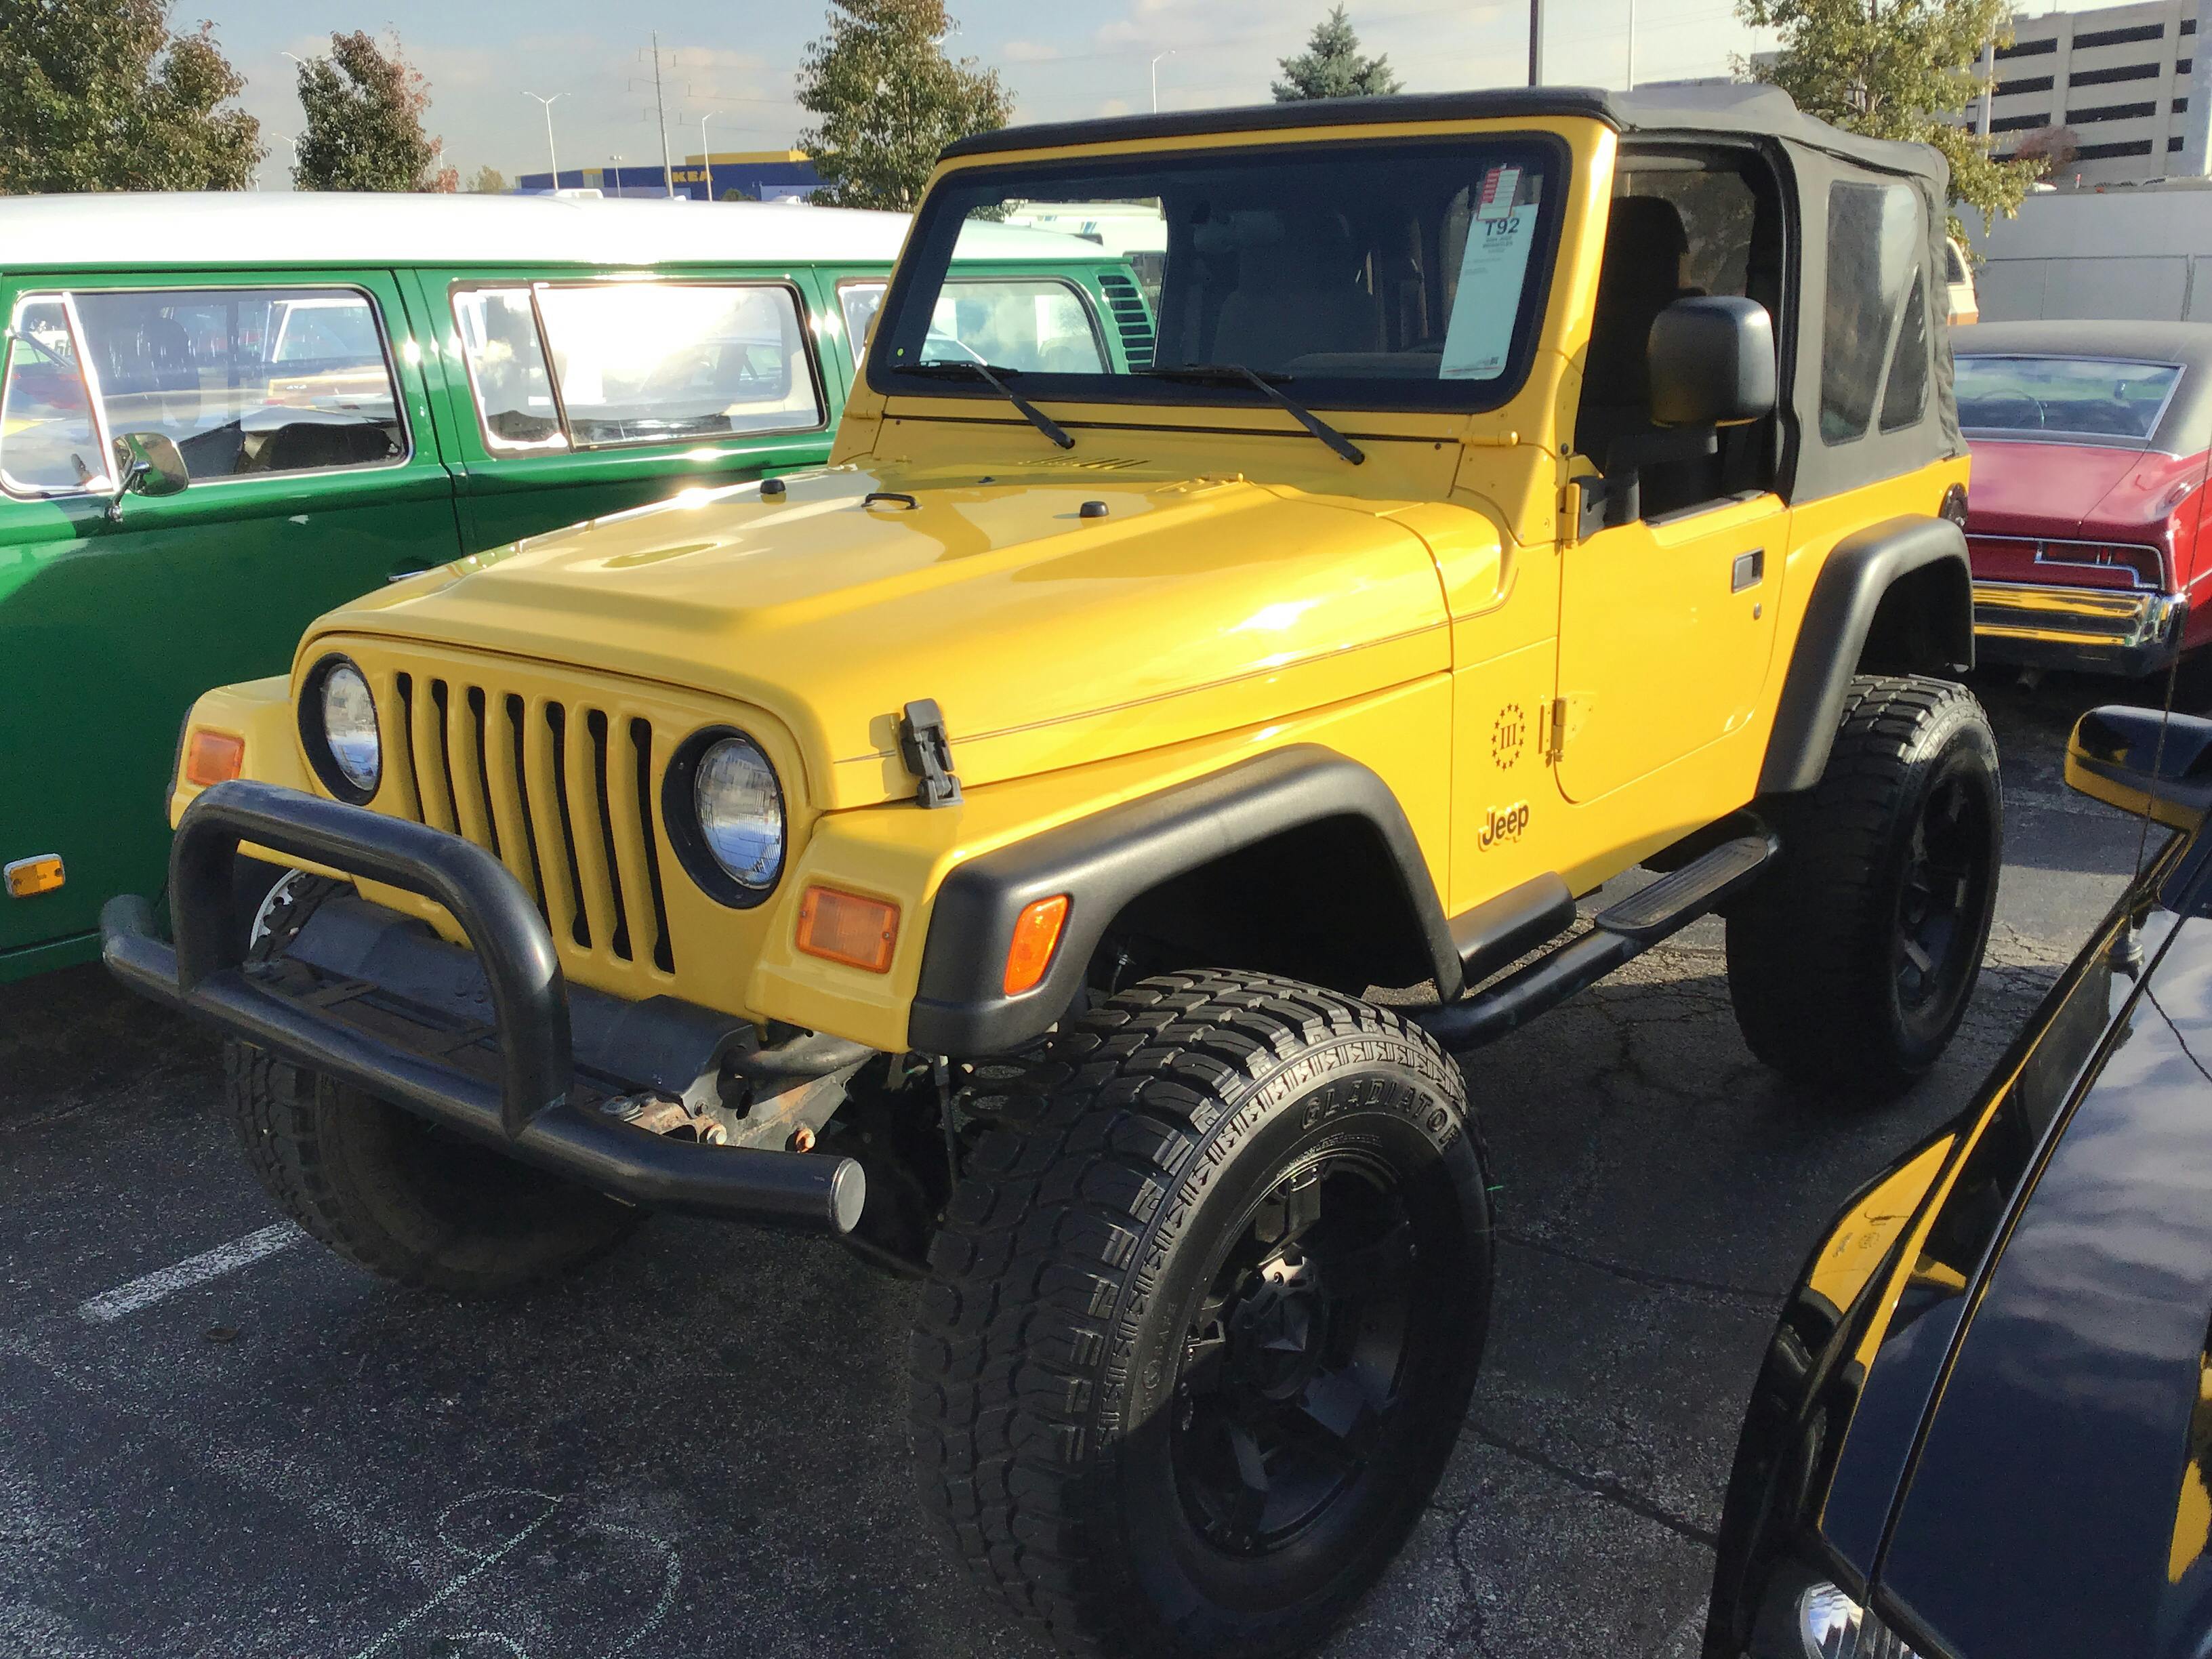 1997 Jeep Wrangler SE | Hagerty Valuation Tools